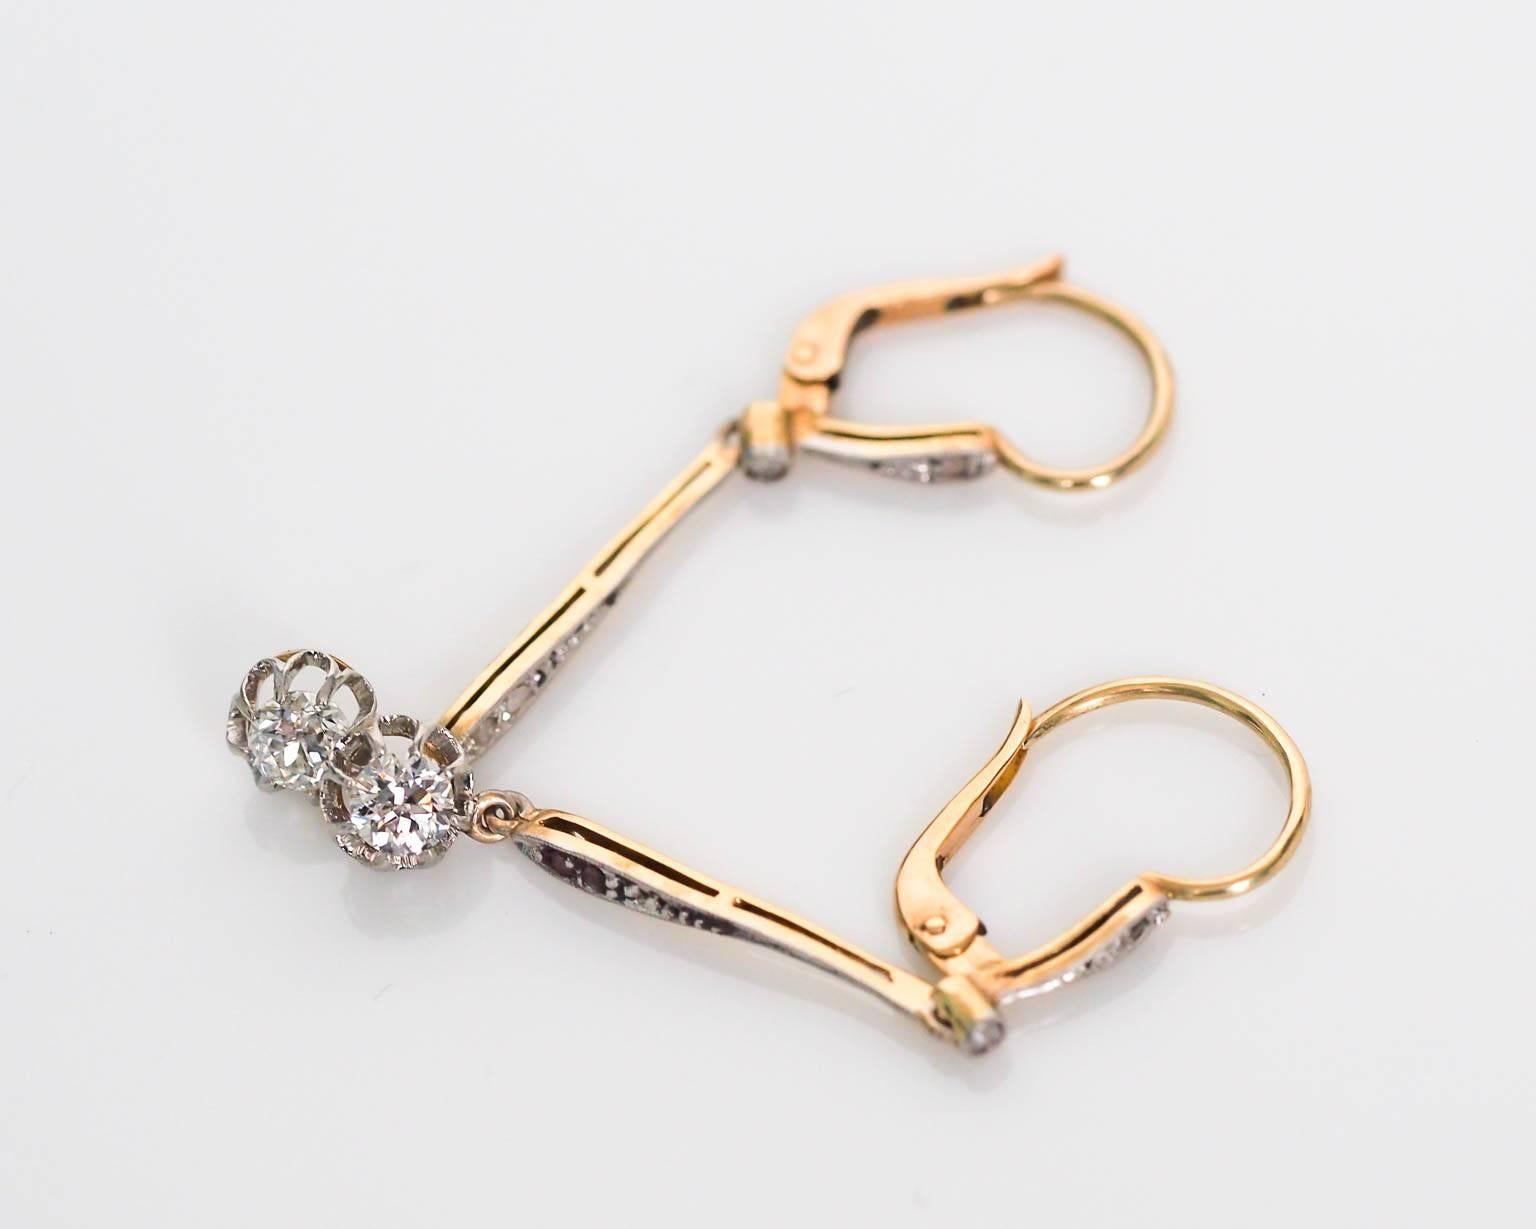 A beautiful pair of Victorian drop dangle earrings. The old mine cushions on both earrings weigh .27ct each and are set witha buttercup prong style. There are 2 rose cut diamonds on each earring as well. 

This piece is accompanied with a GIA